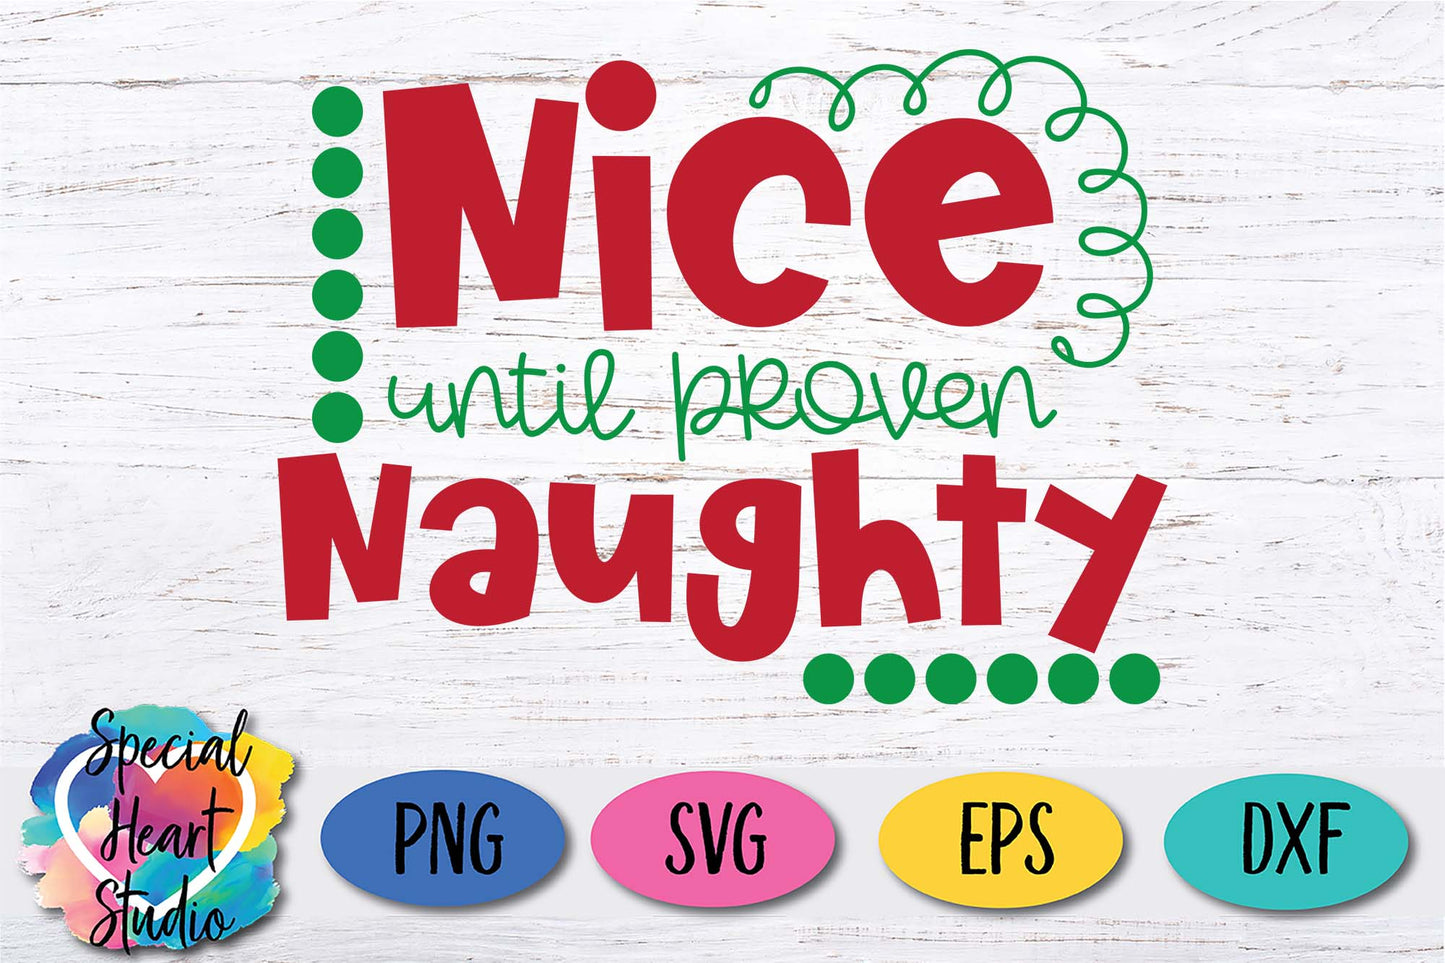 Nice until proven Naughty